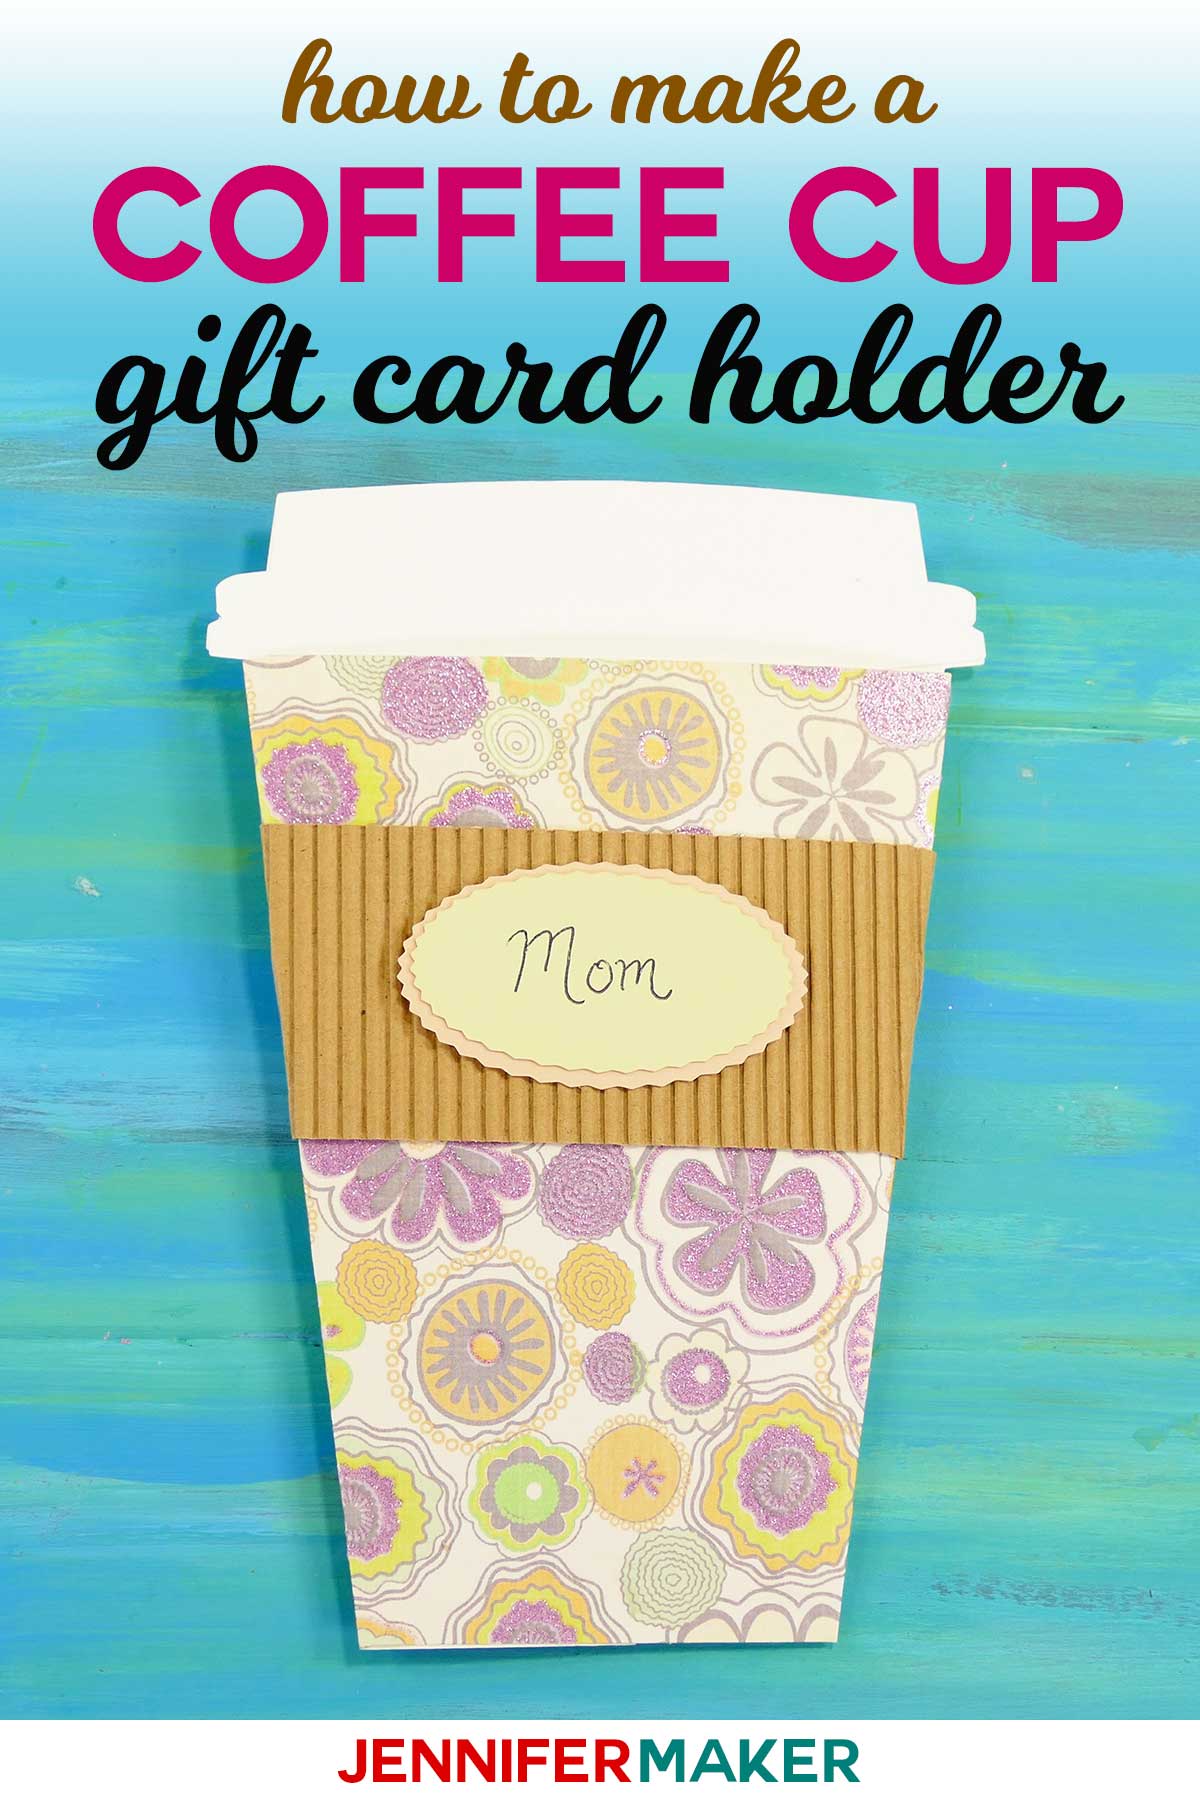 TakeOut Coffee Cup Gift Card Holder Jennifer Maker